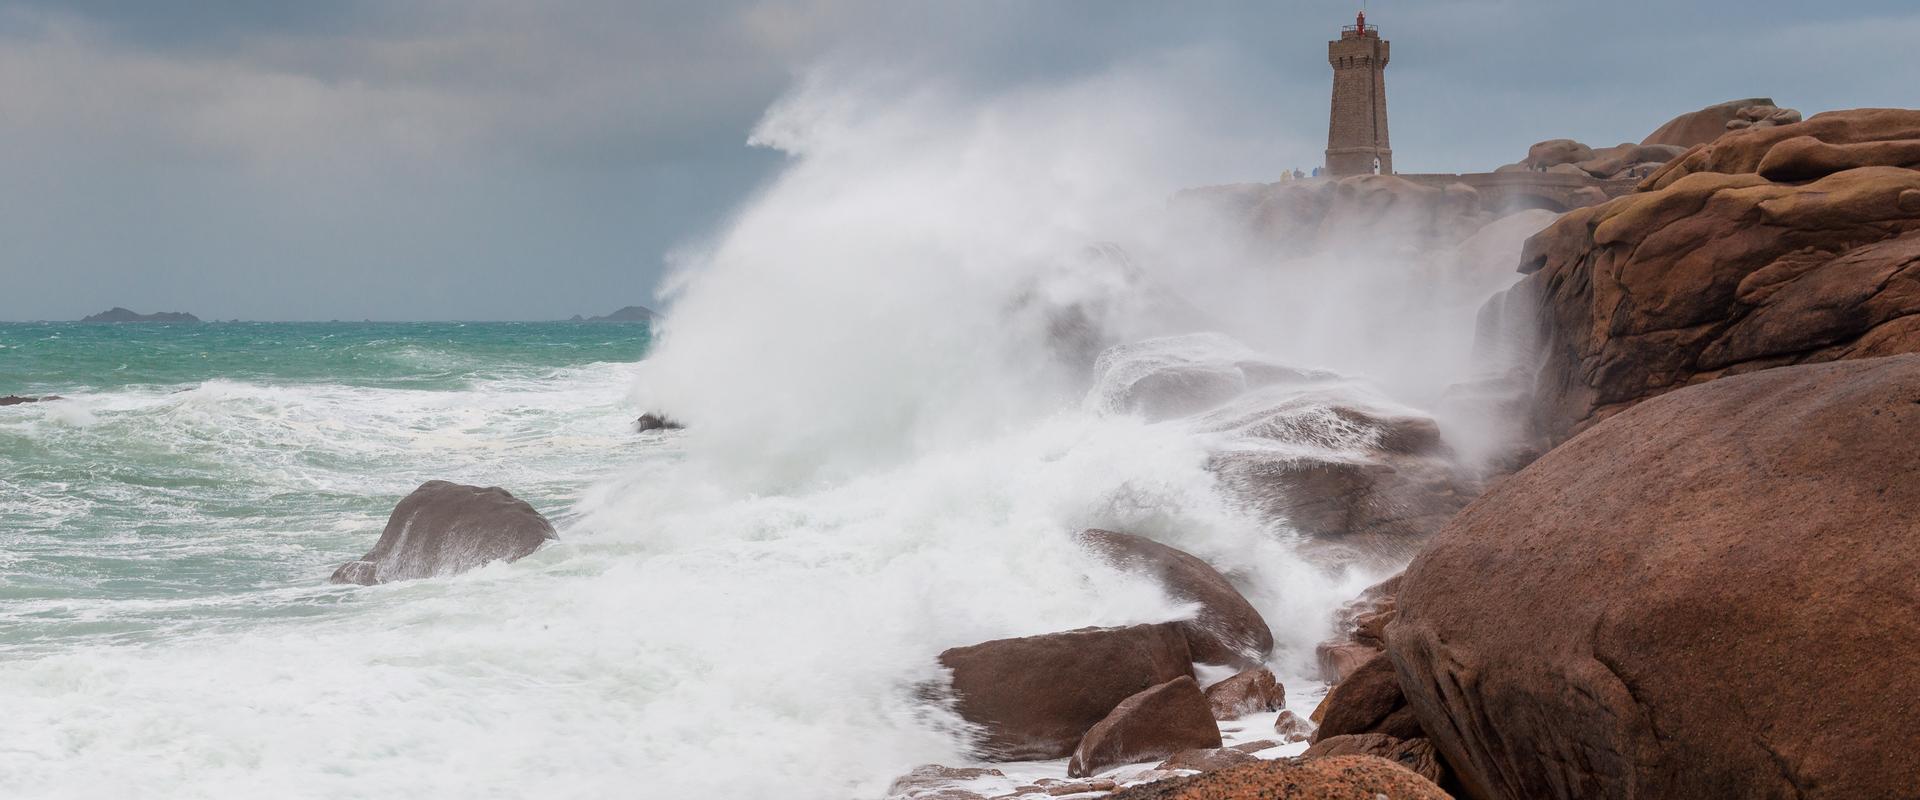 Waves at the foot of the Mean Ruz lighthouse, Pink Granite Coast